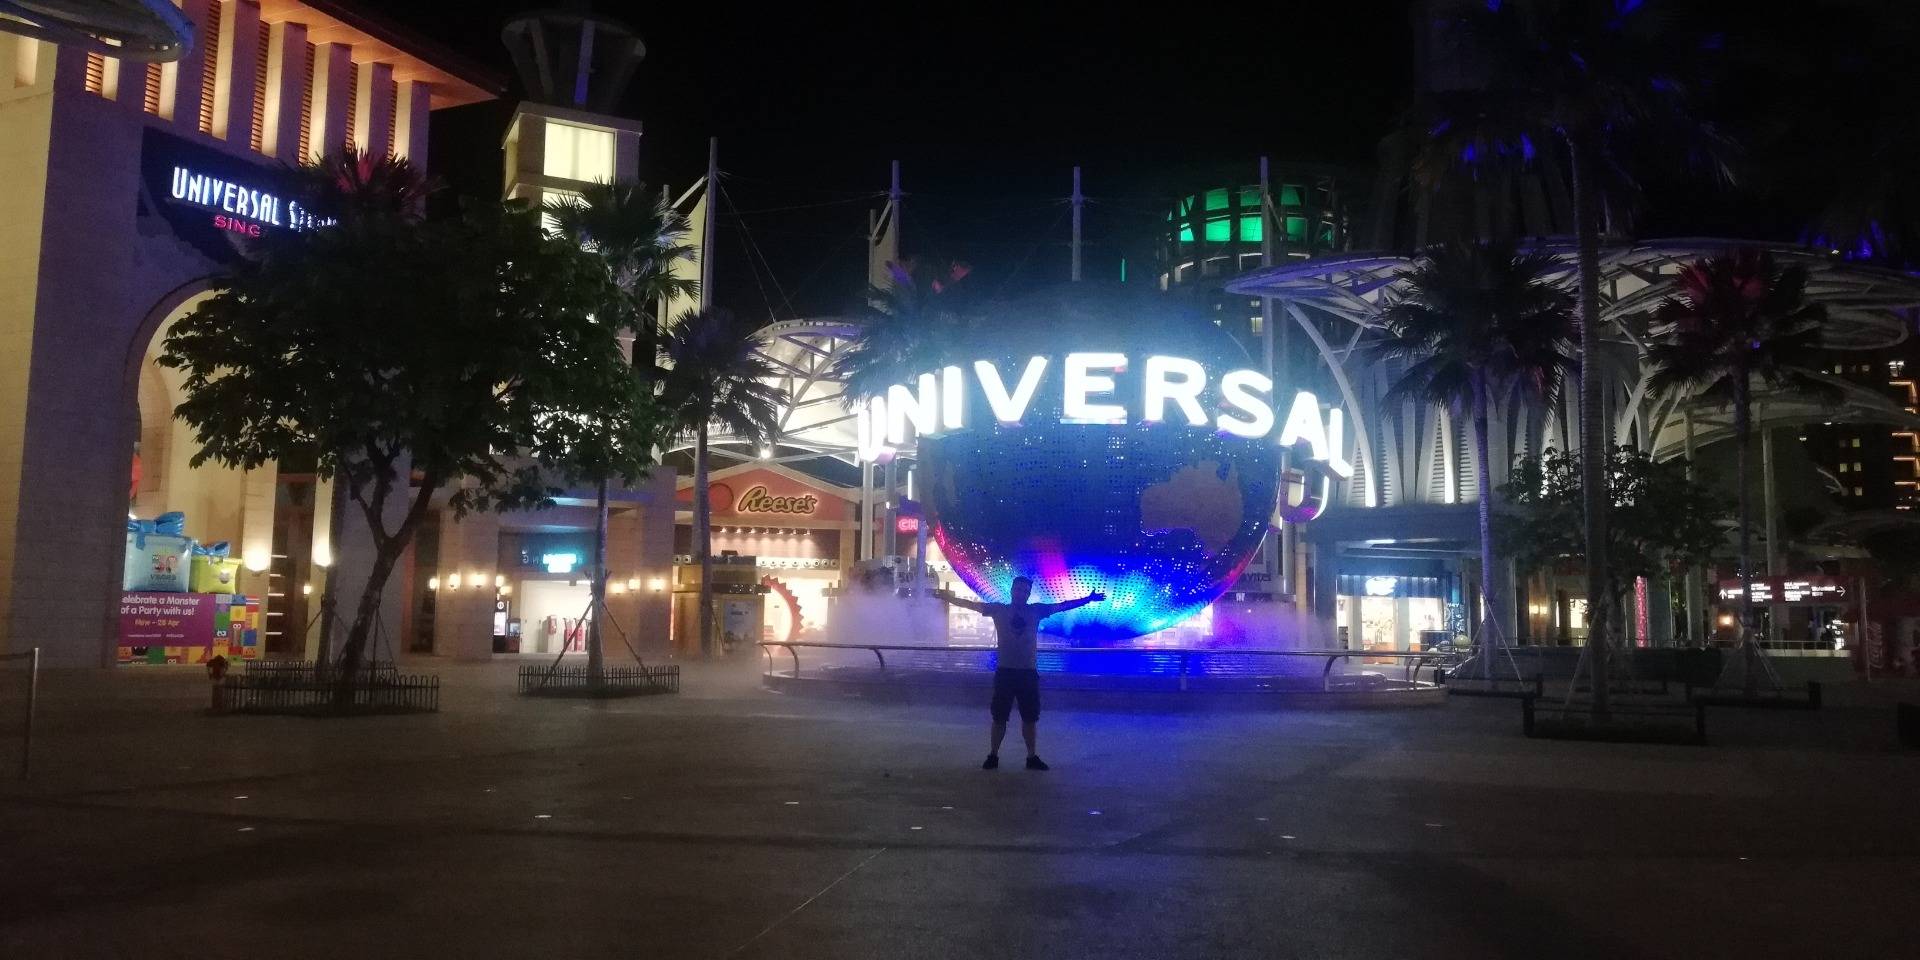 One last moment at the Universal Studios glowing globe!